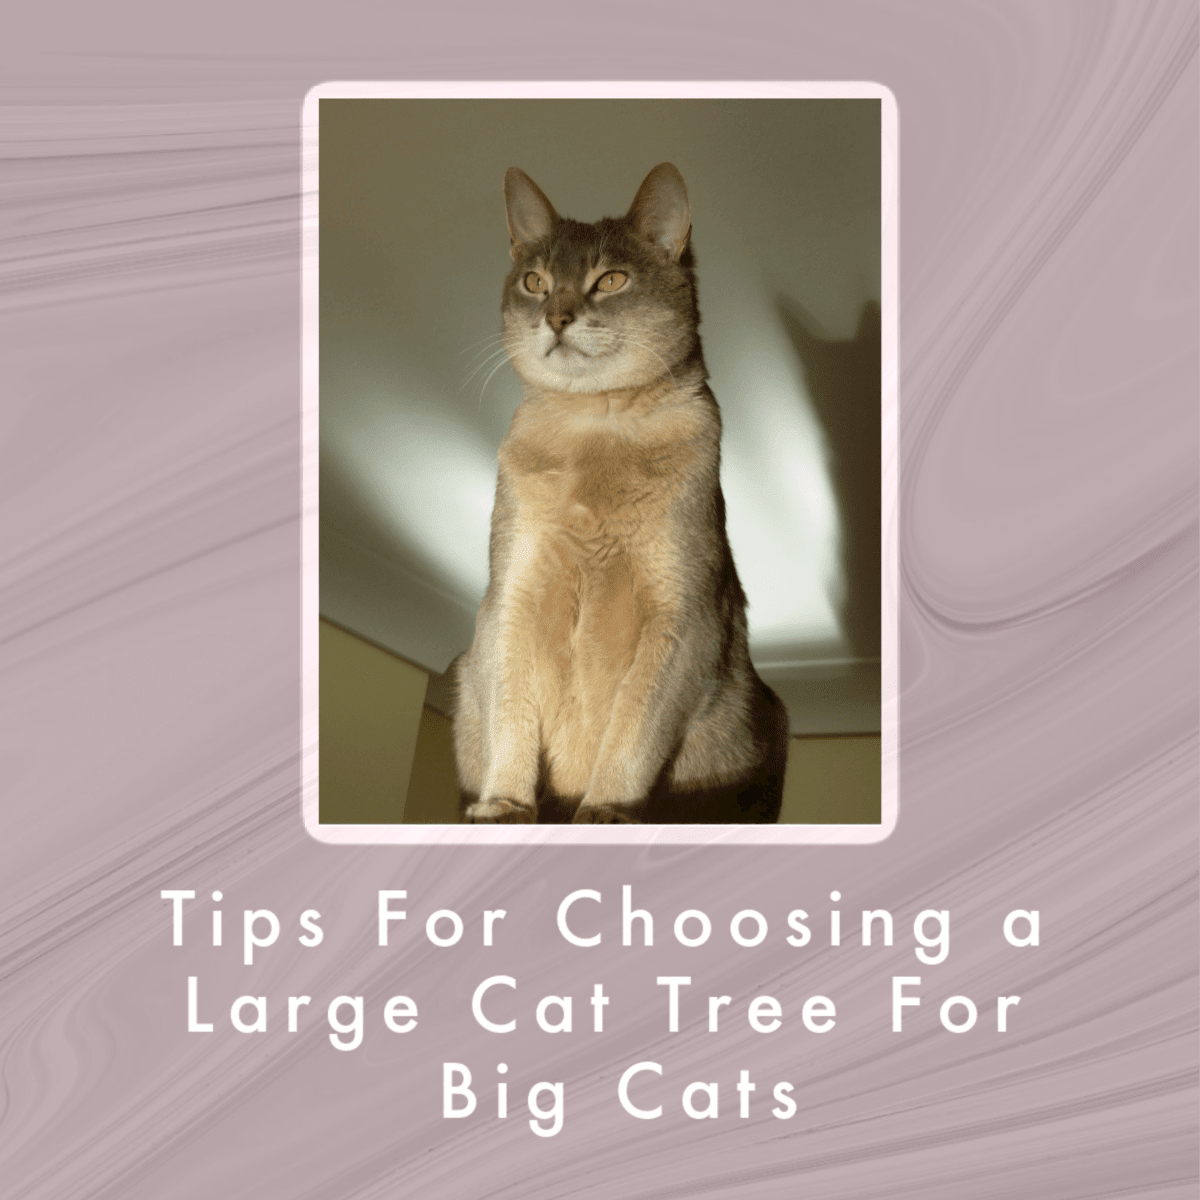 Tips For Choosing a Large Cat Tree For Big Cats